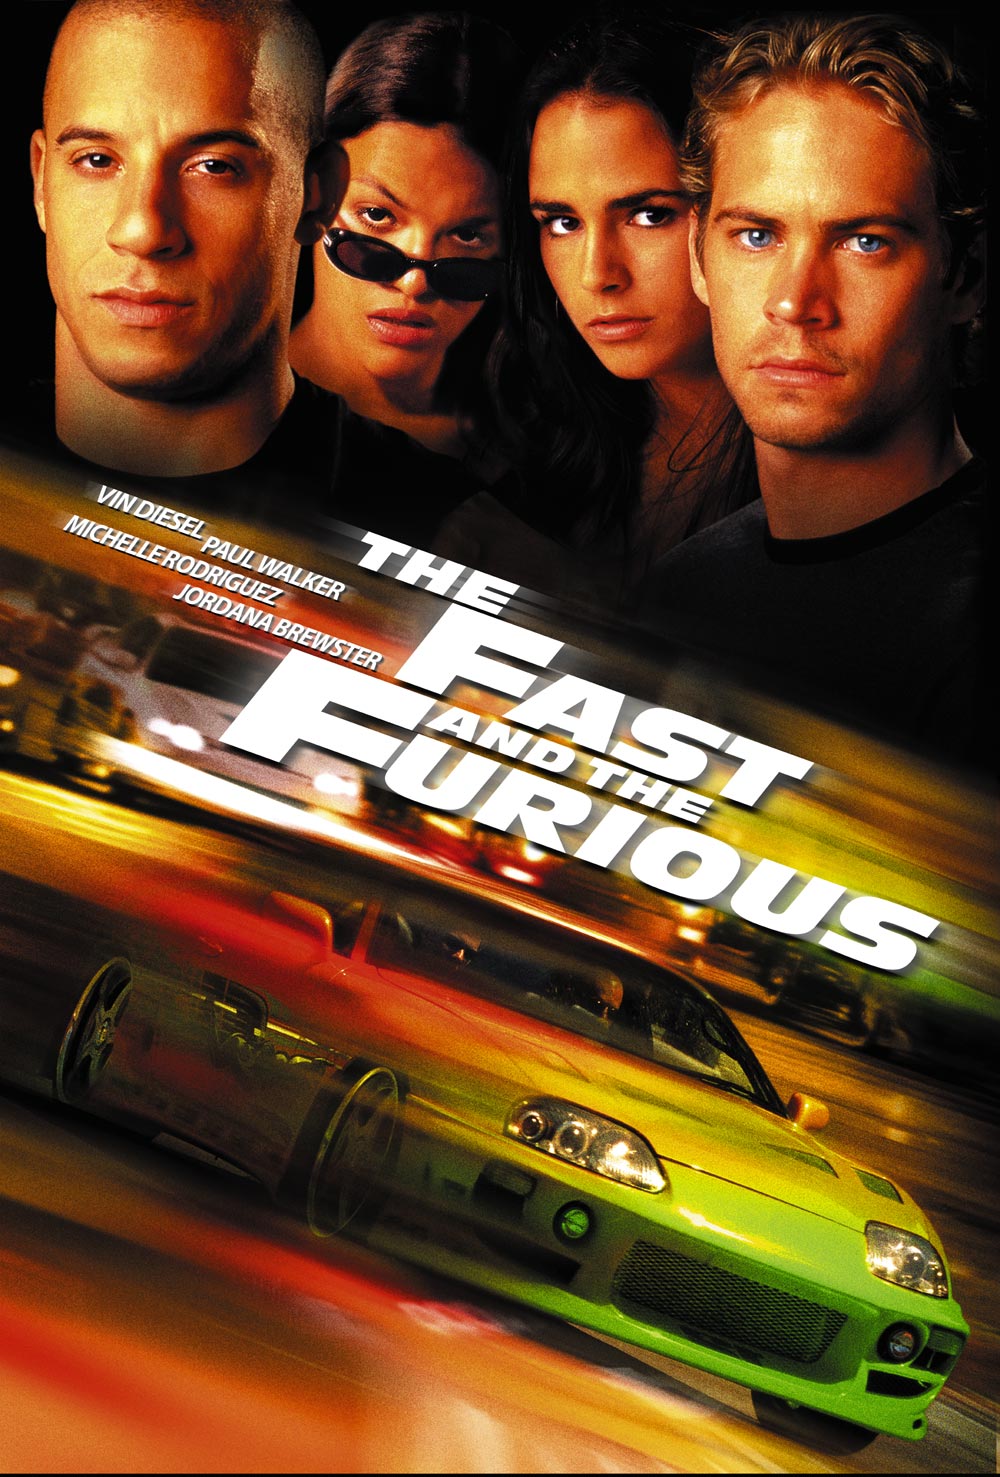 https://static.wikia.nocookie.net/fastandfurious/images/0/04/The_Fast_and_the_Furious_%28DVD_Cover%29.jpeg/revision/latest?cb=20150501043627